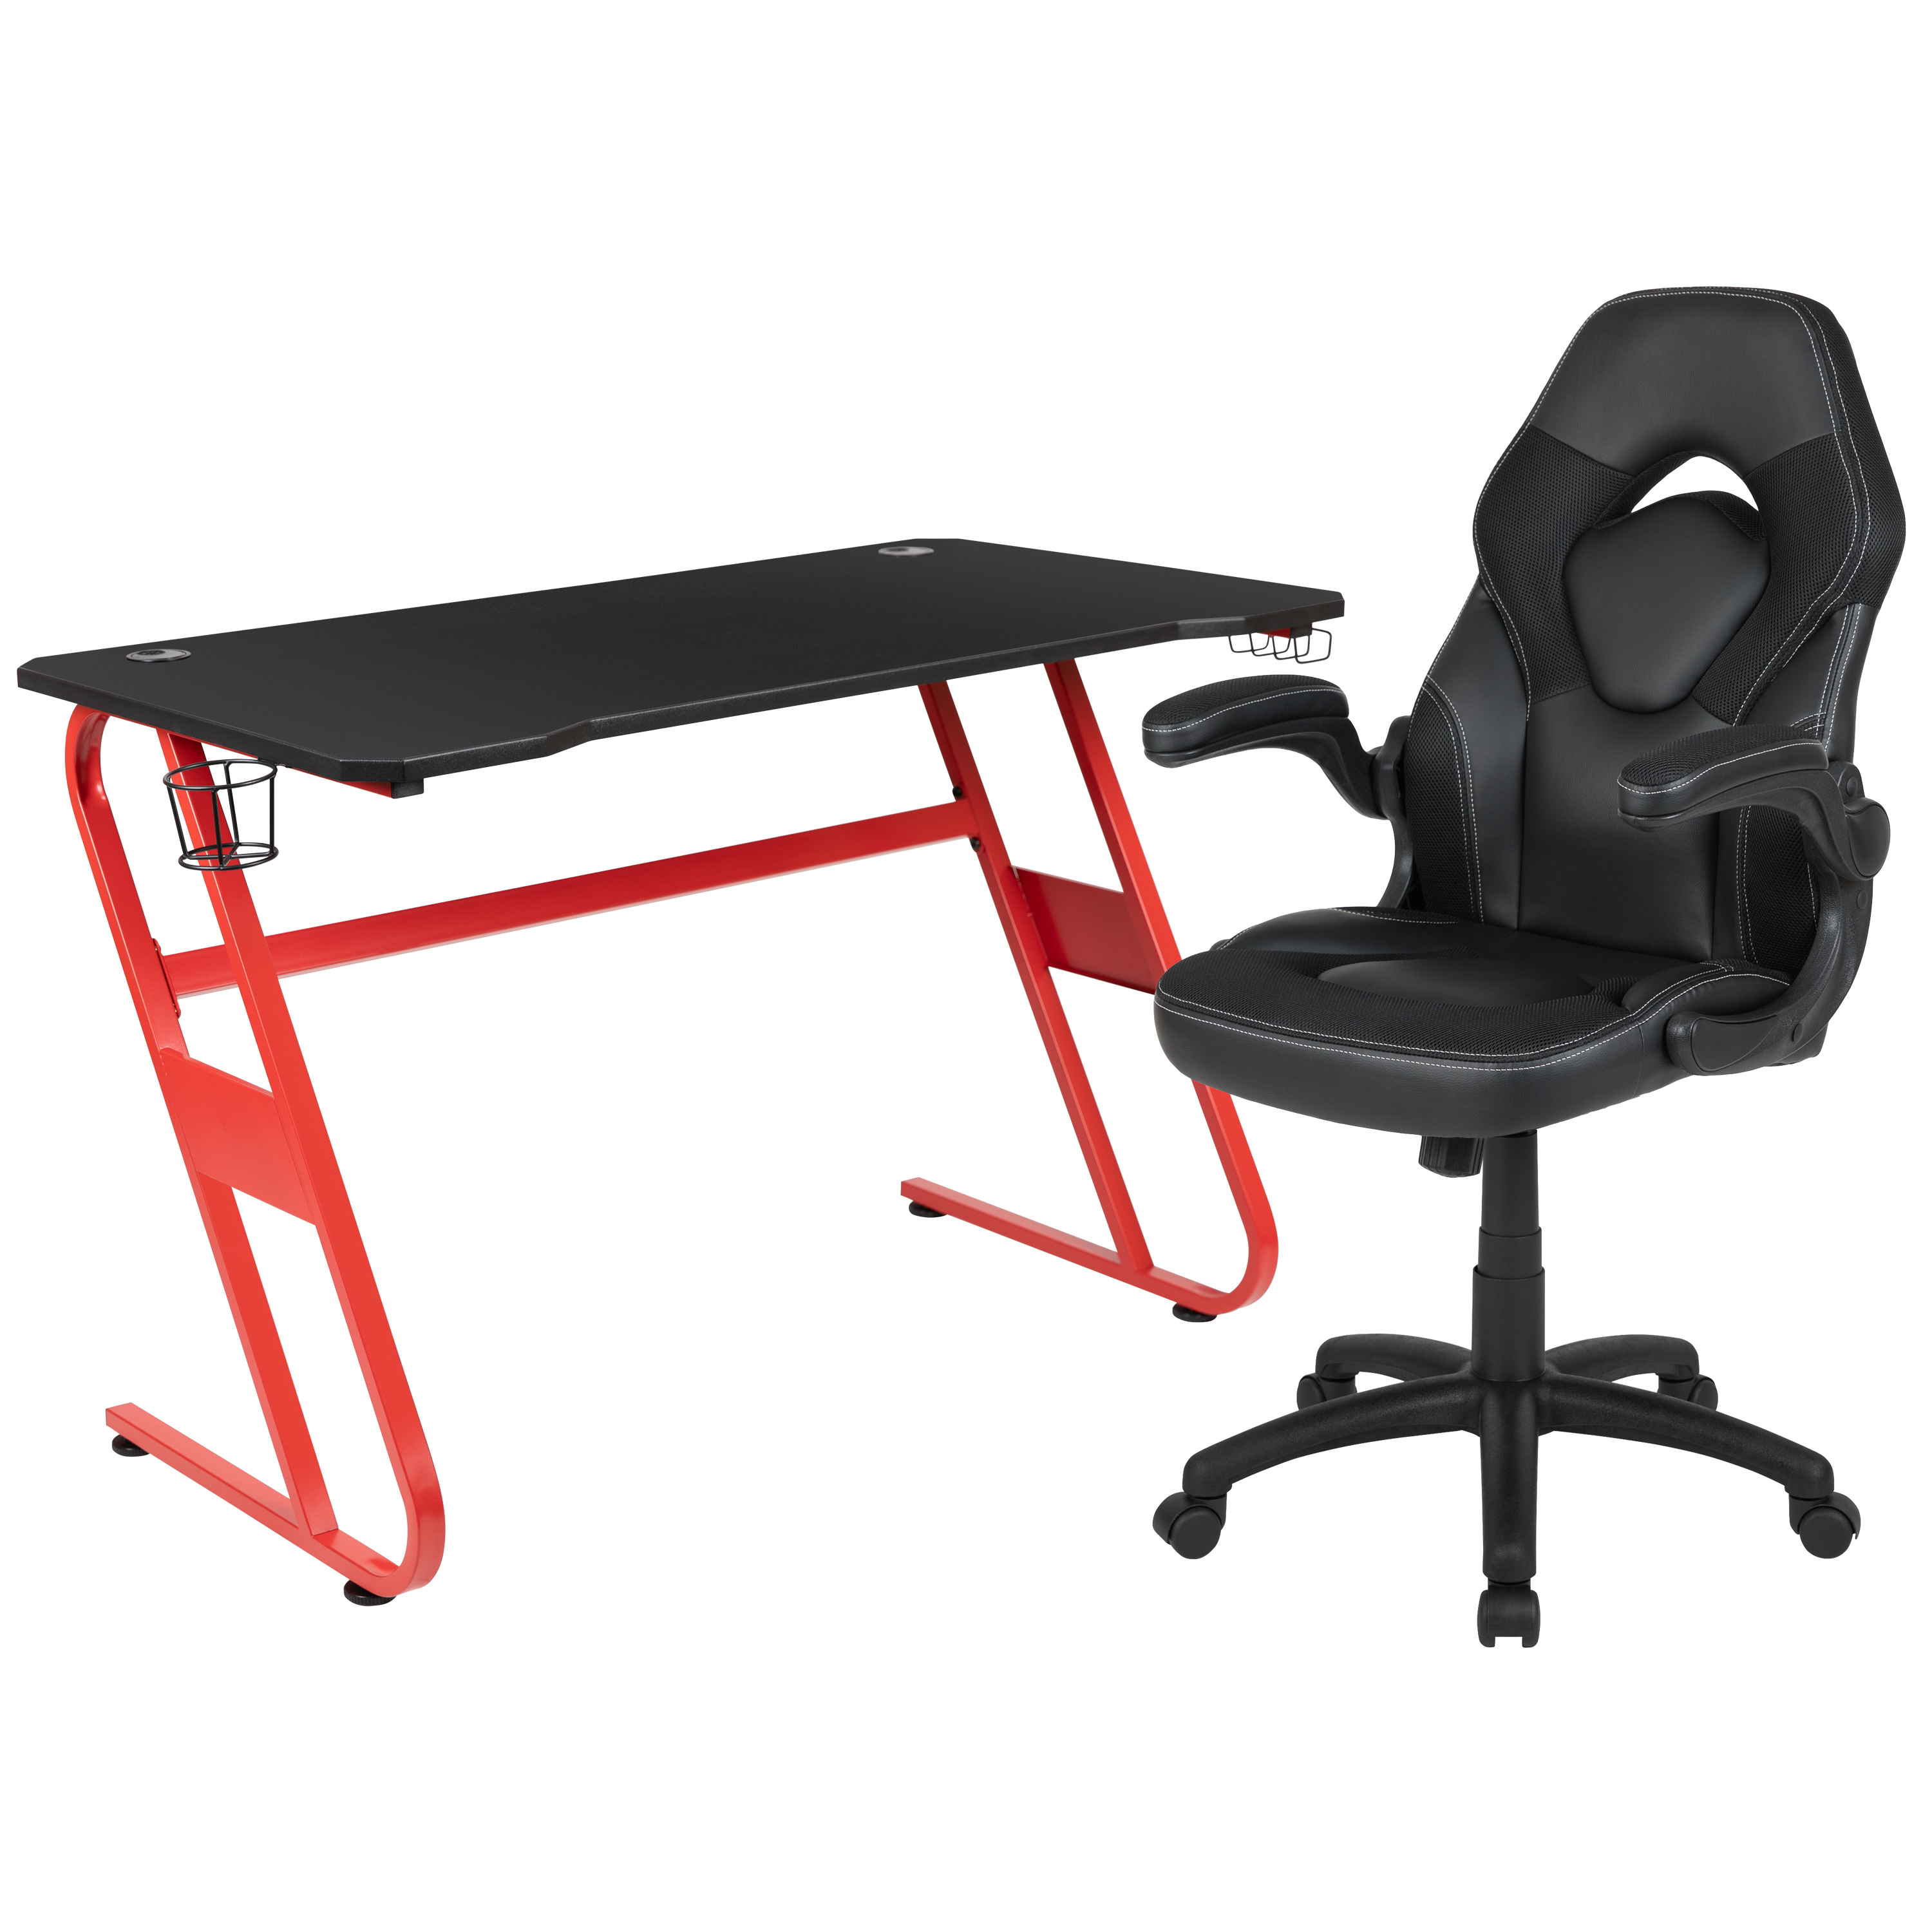 Flash Furniture BLN-X10RSG1030-BK-GG Red Gaming Desk and Black Racing Chair Set with Cup Holder and Headphone Hook